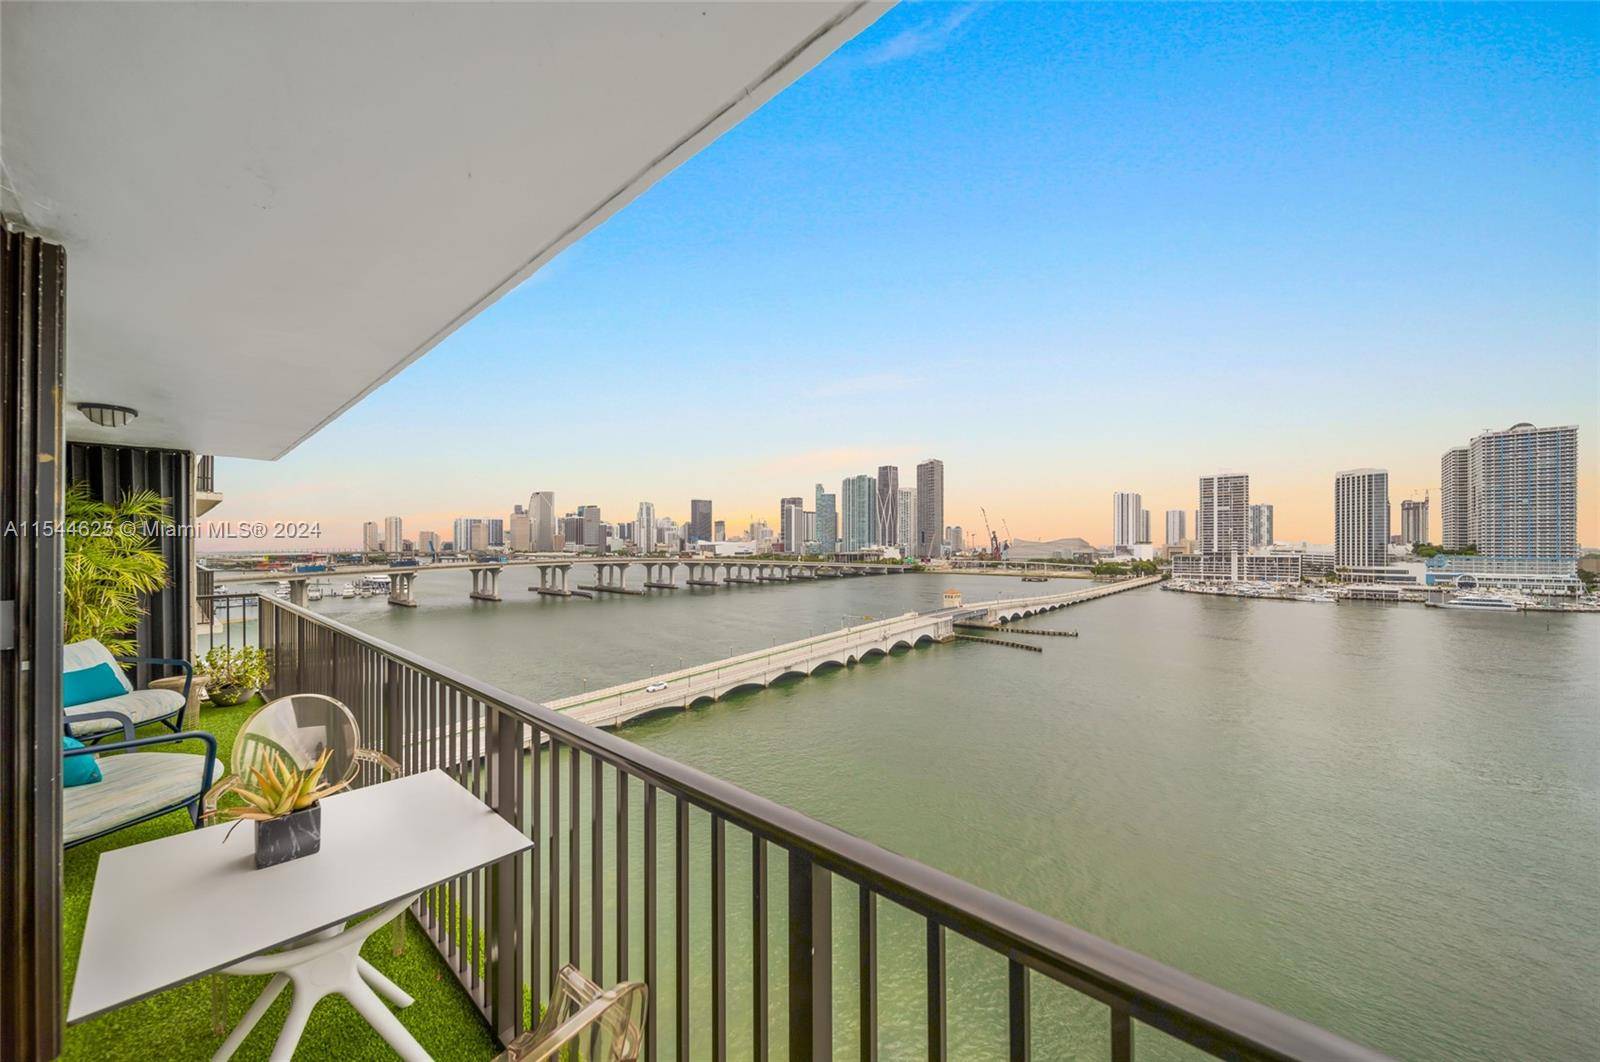 Welcome to this stunning modern, recently remodeled apartment the most prestigious area in Miami.